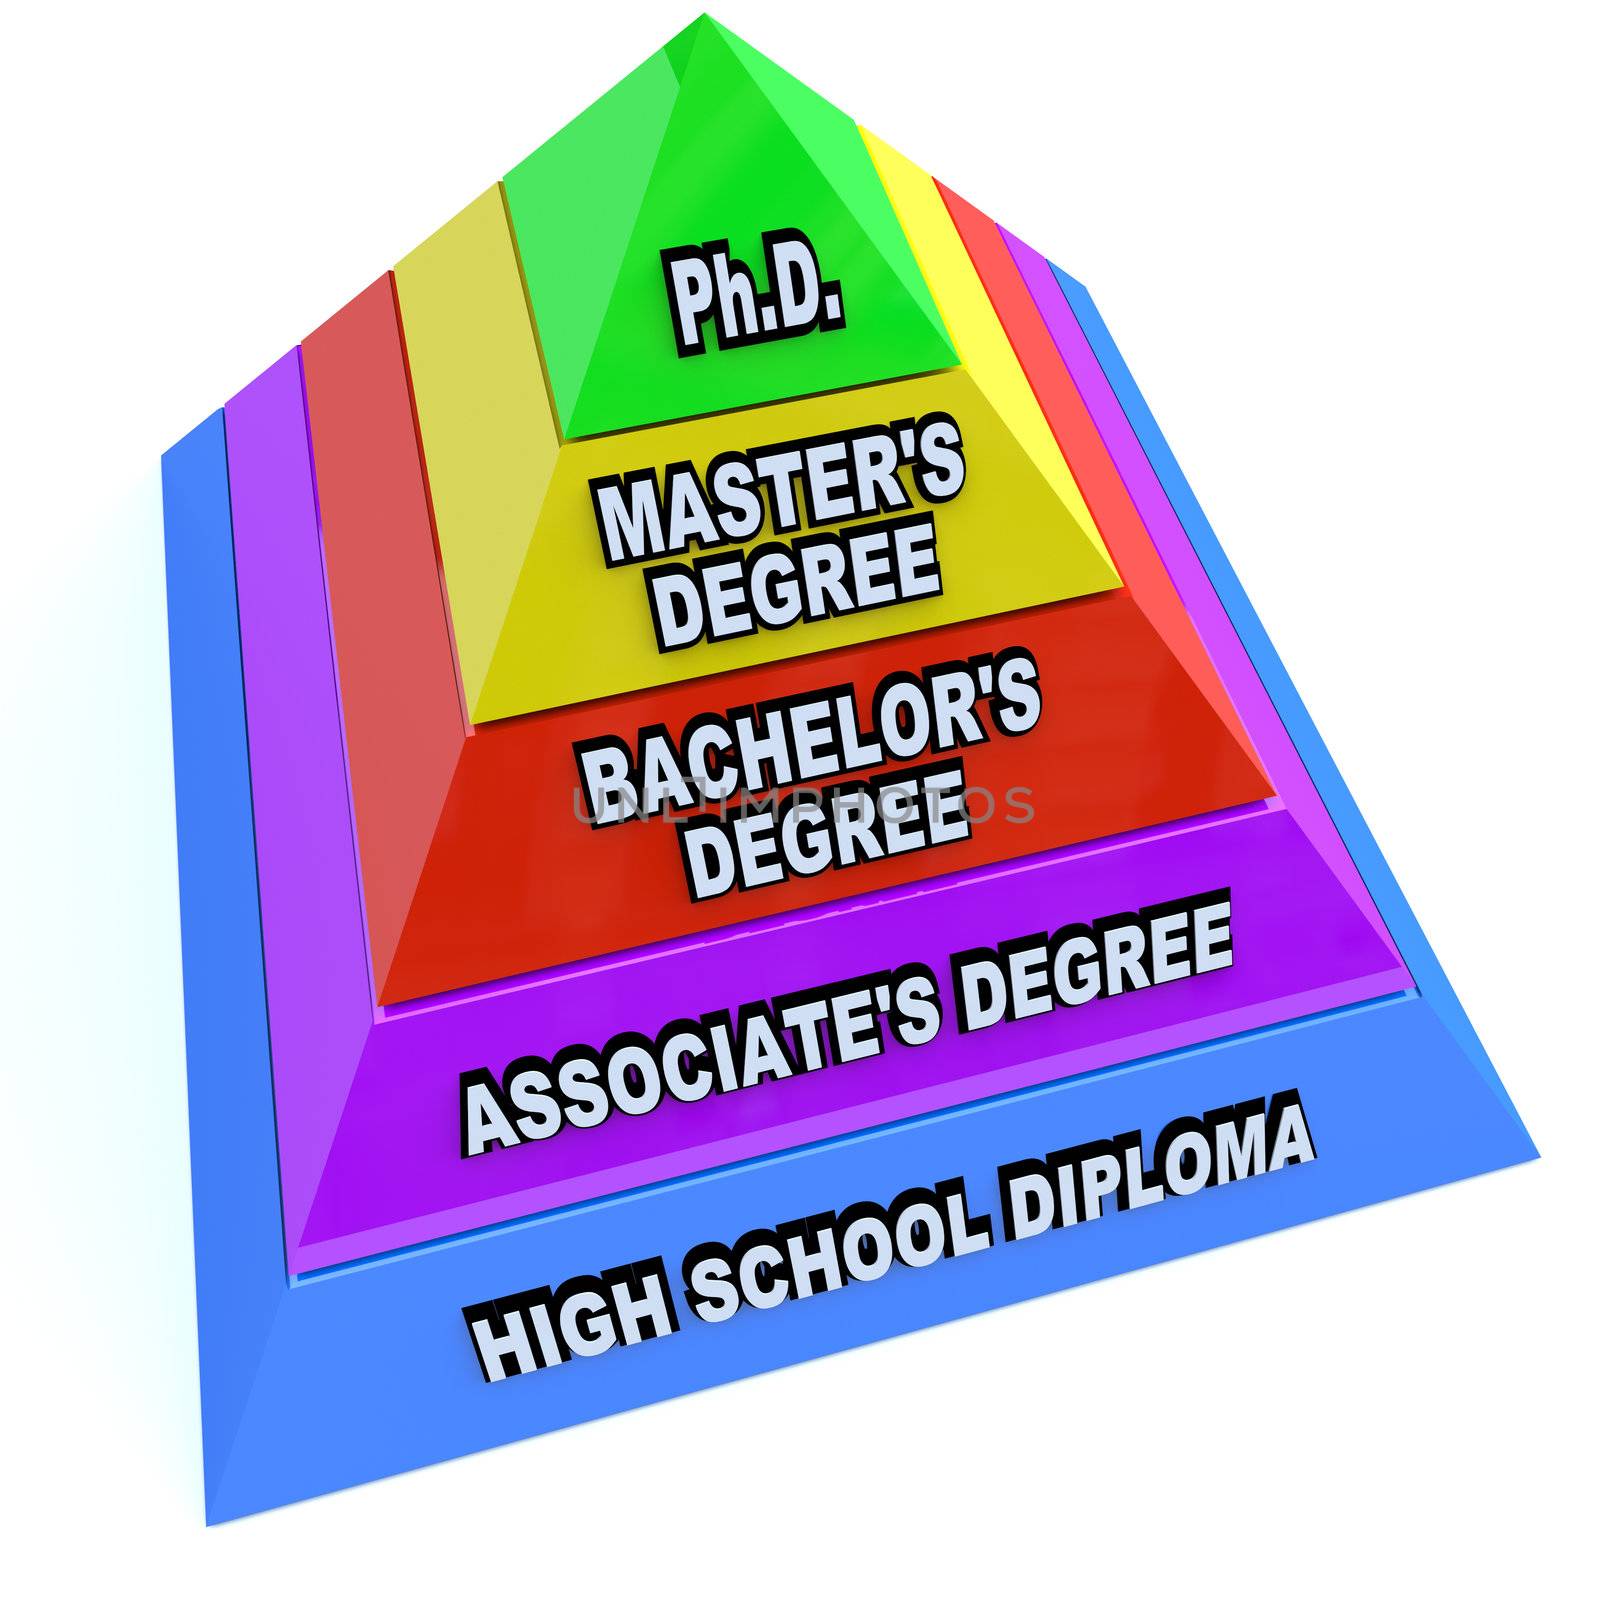 Higher Learning Education Degrees - Pyramid of Knowledge by iQoncept